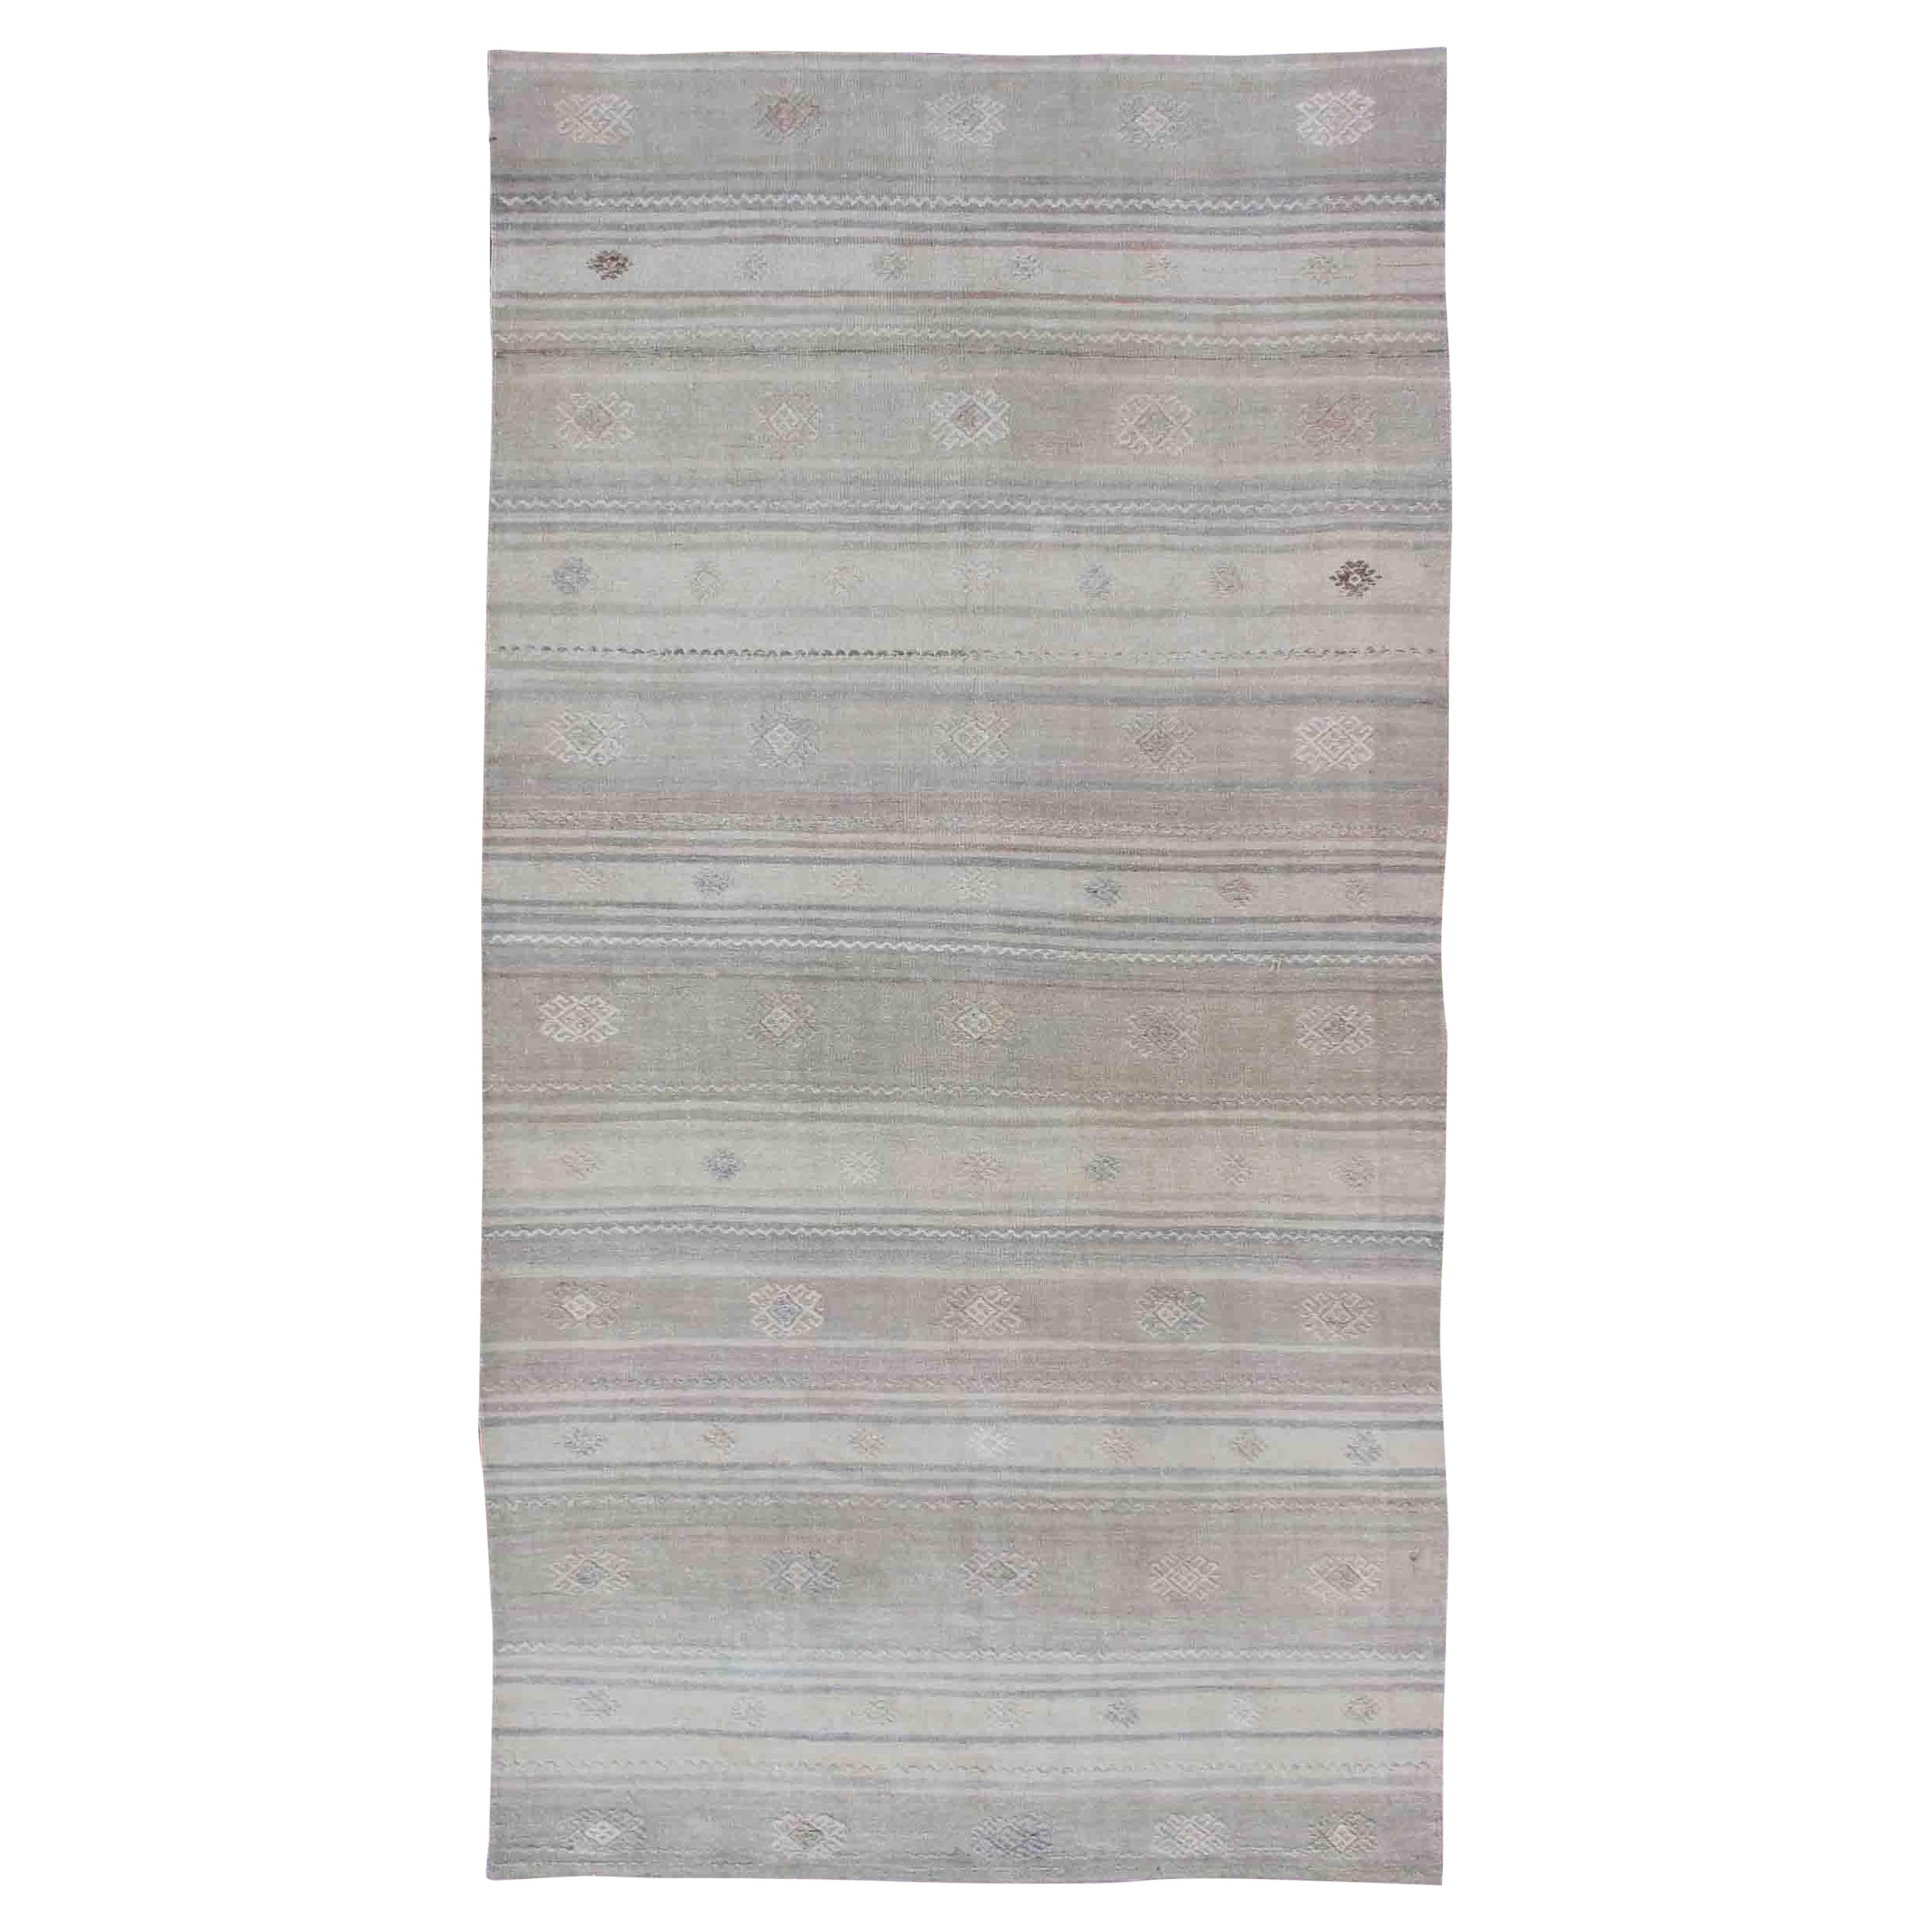 Vintage Hand Woven Turkish Kilim Runner With Stripes in Gray and Natural Tones For Sale